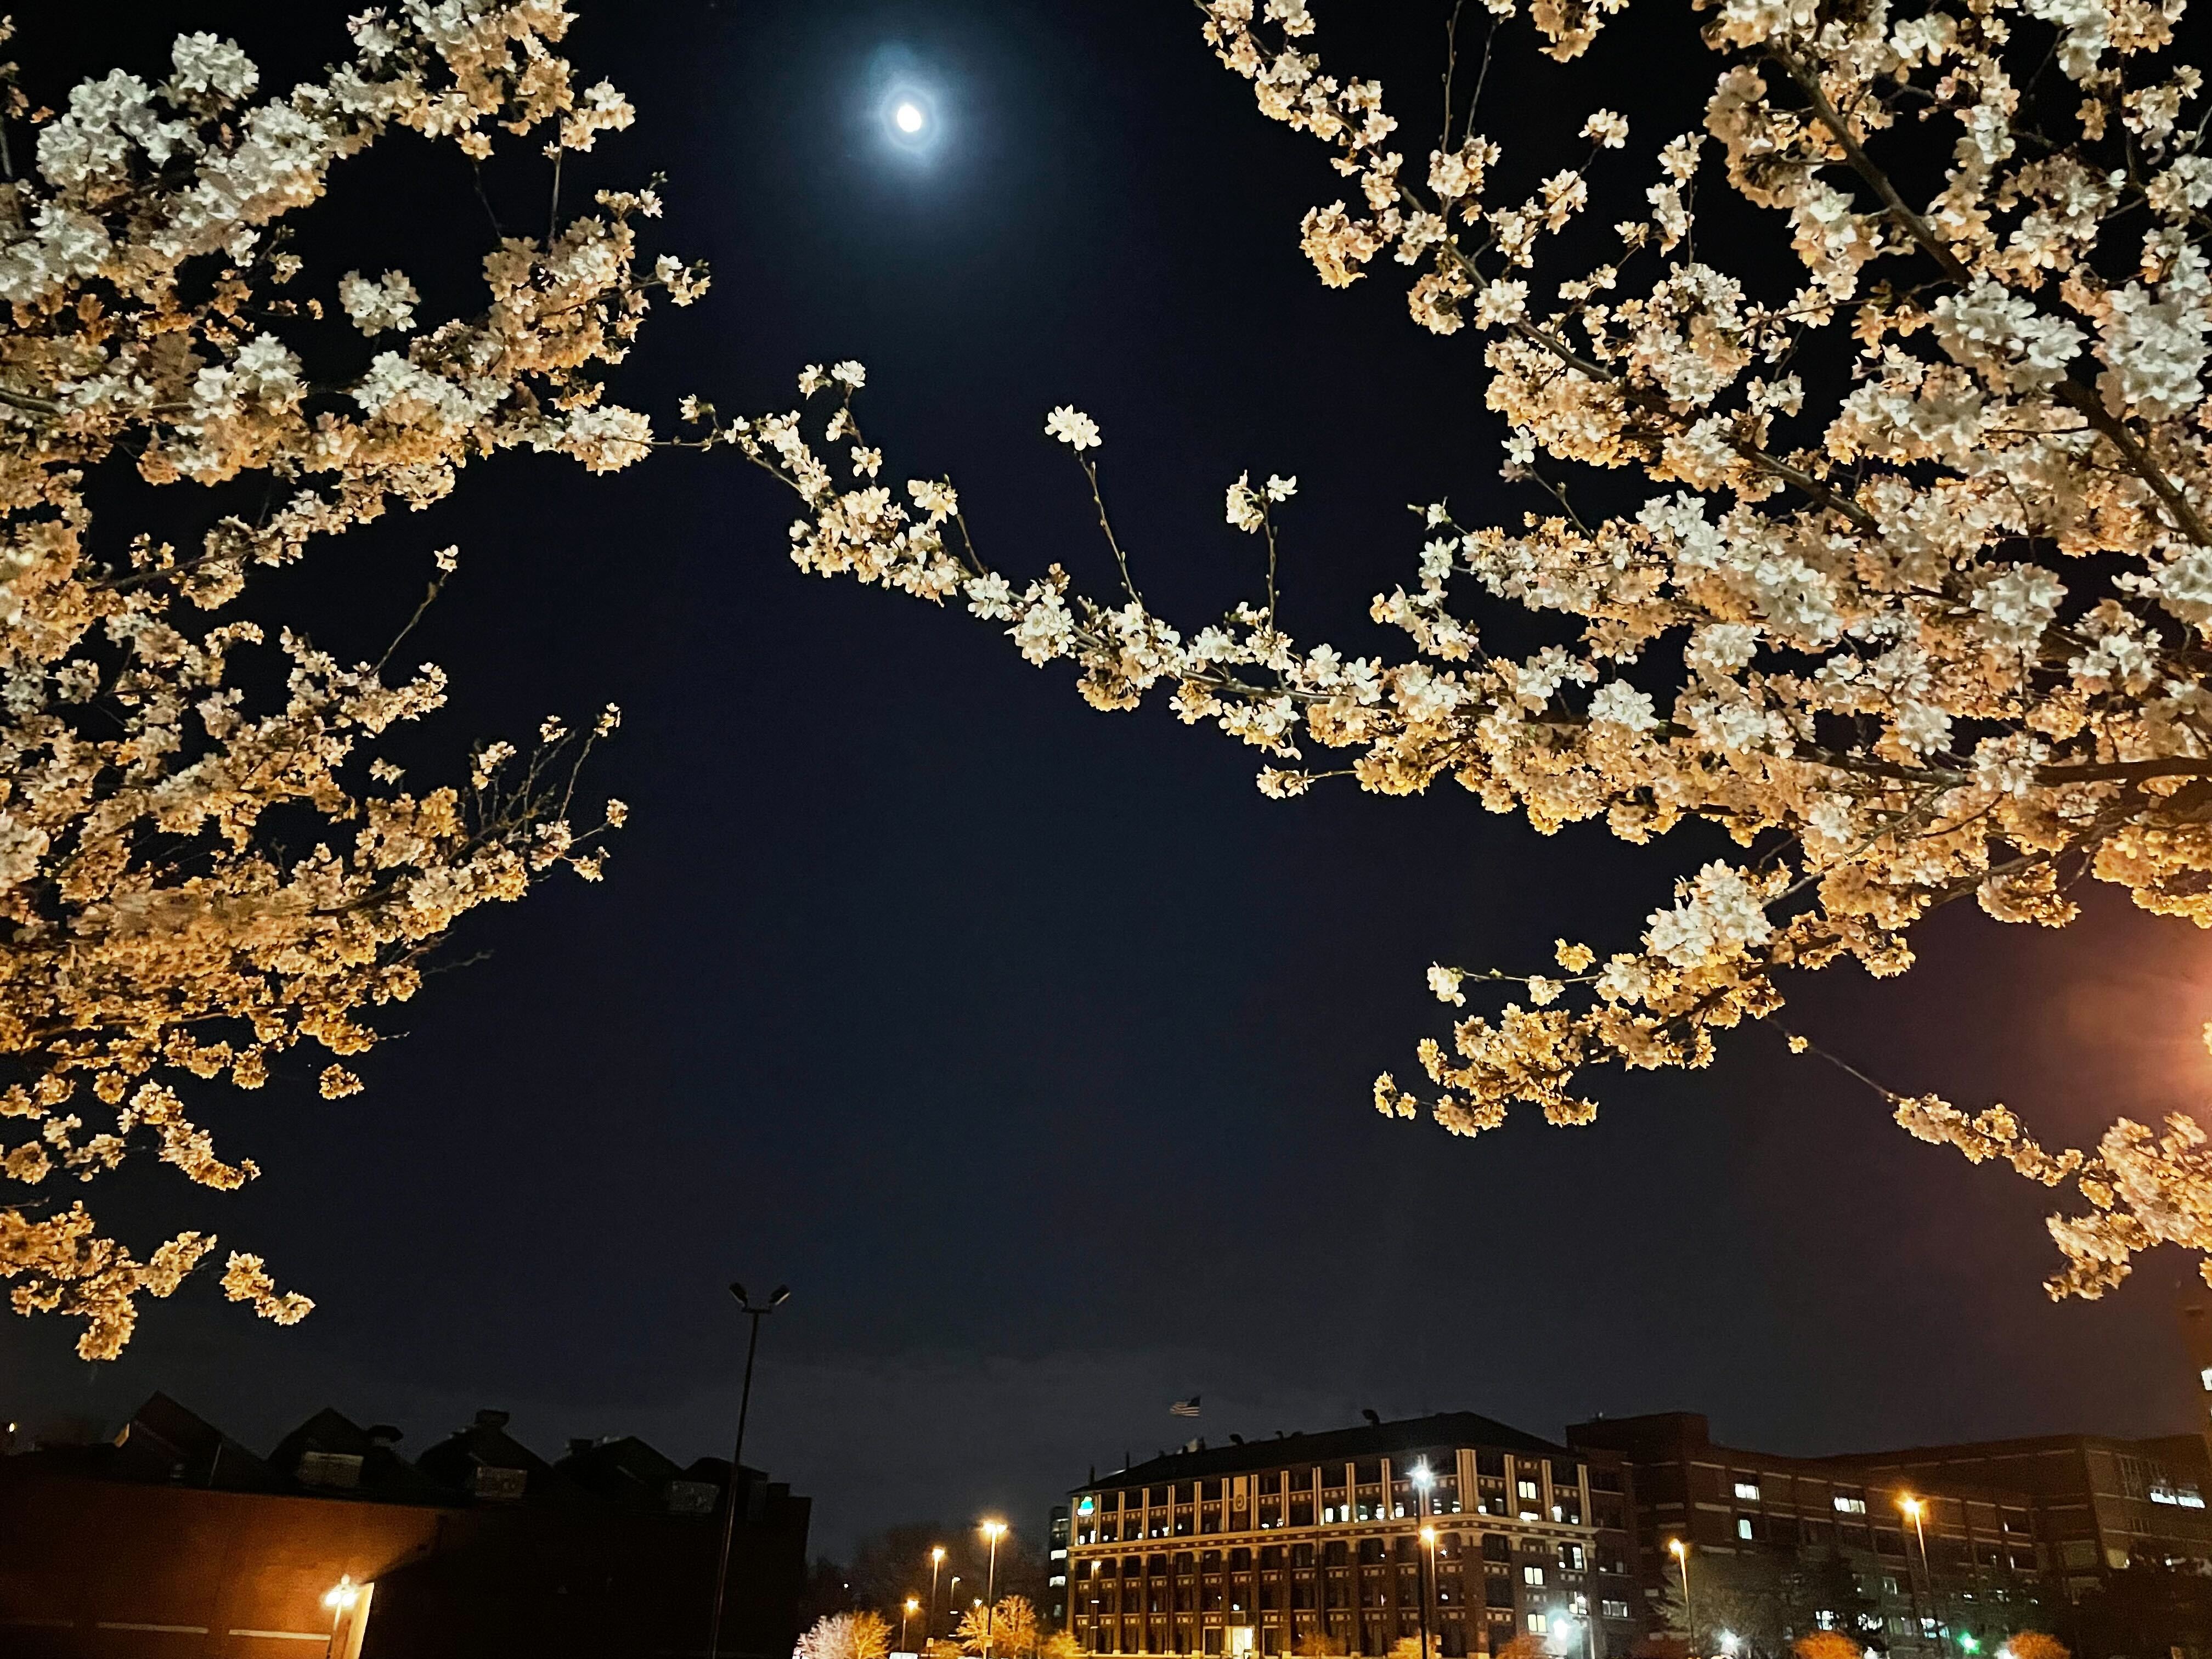 Whit cherry blossoms against the night sky, with the moon glowing